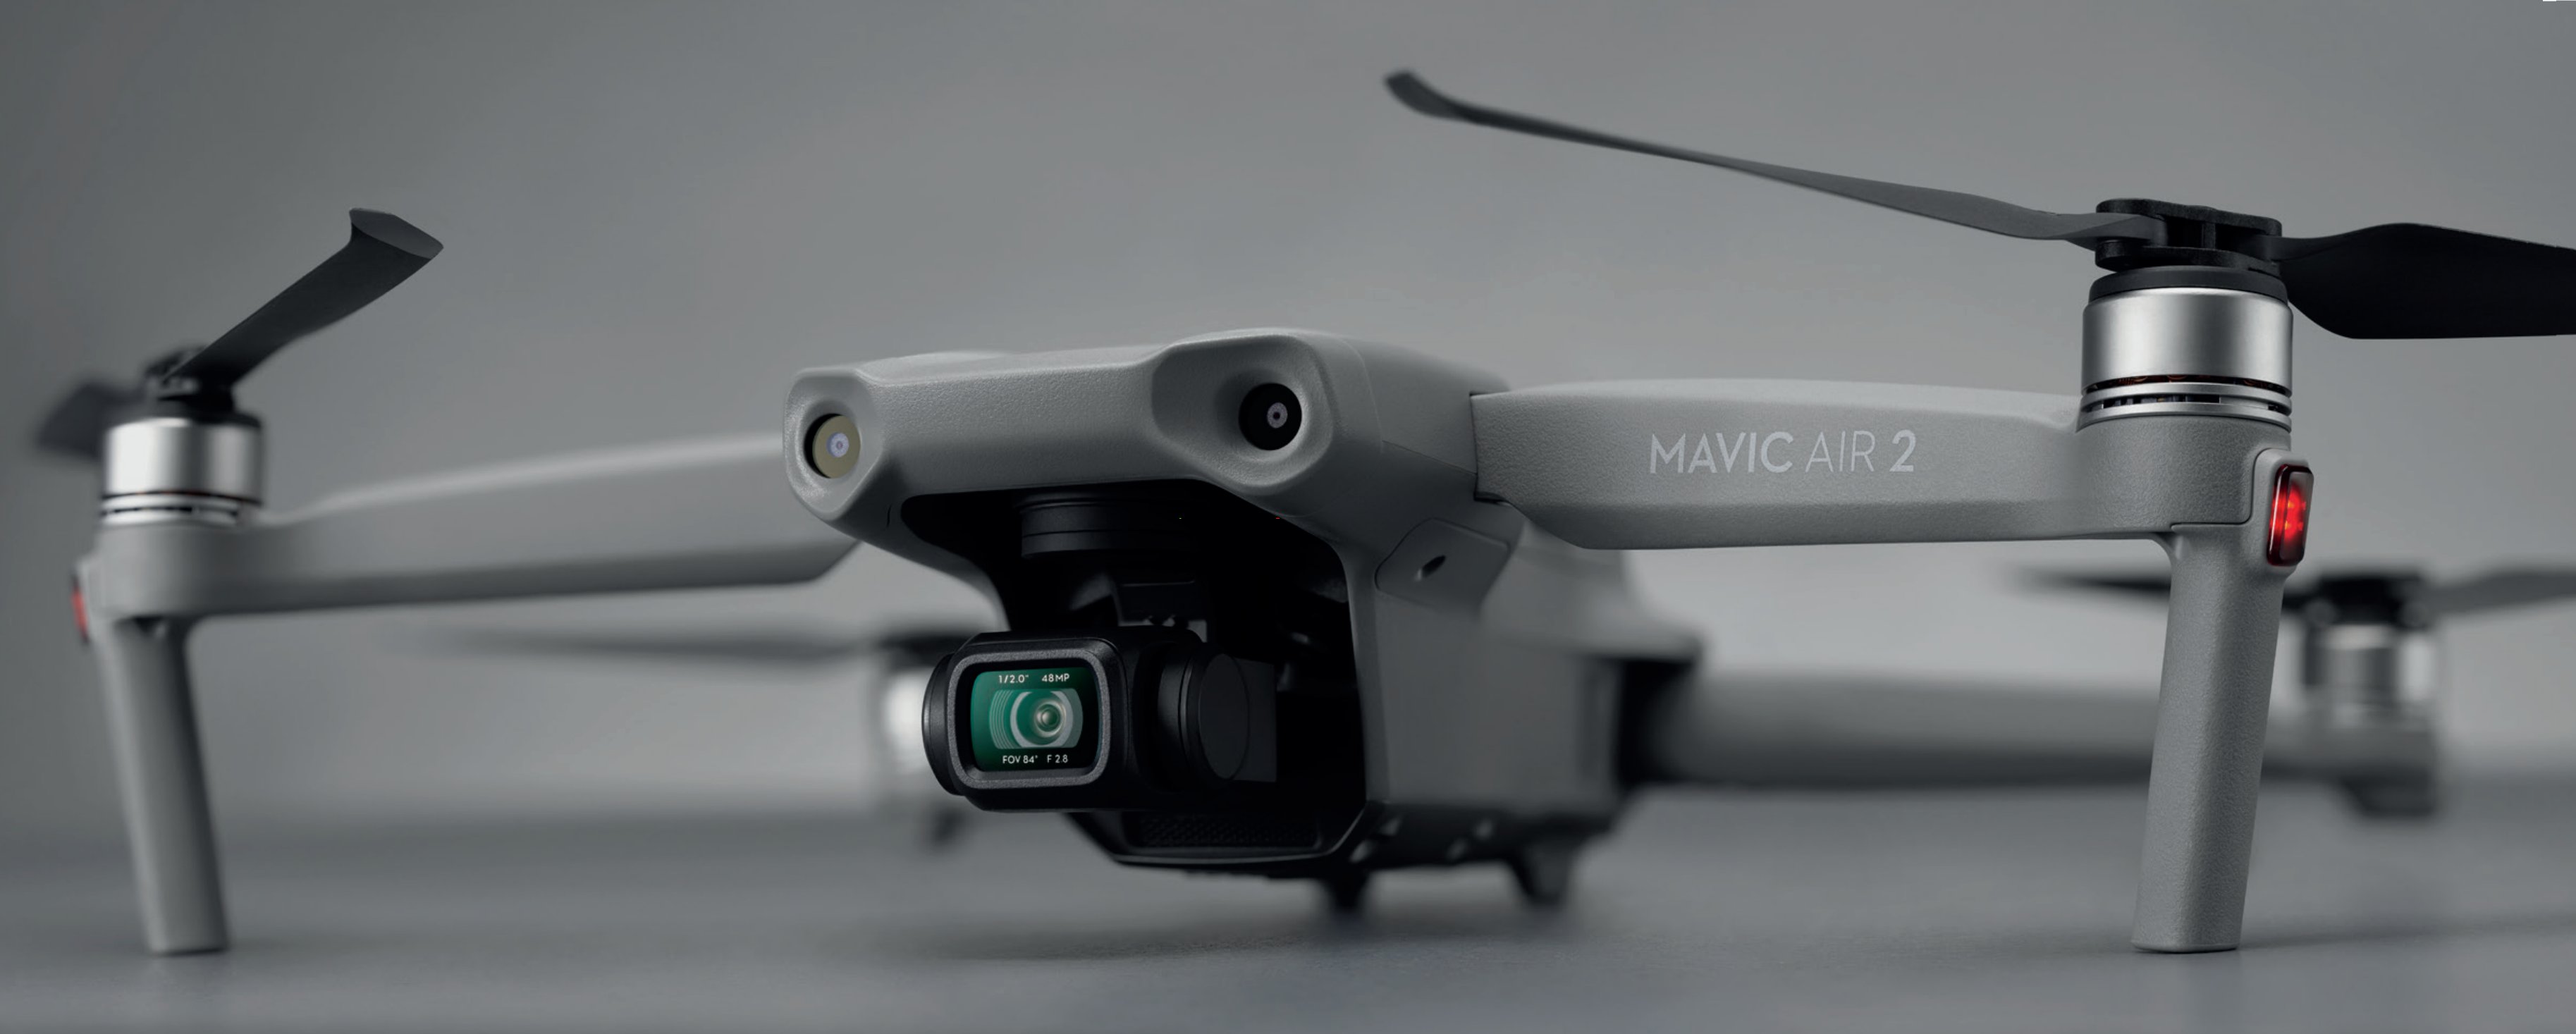 DJI Mavic Air 2: Official images of the new drone and accessories